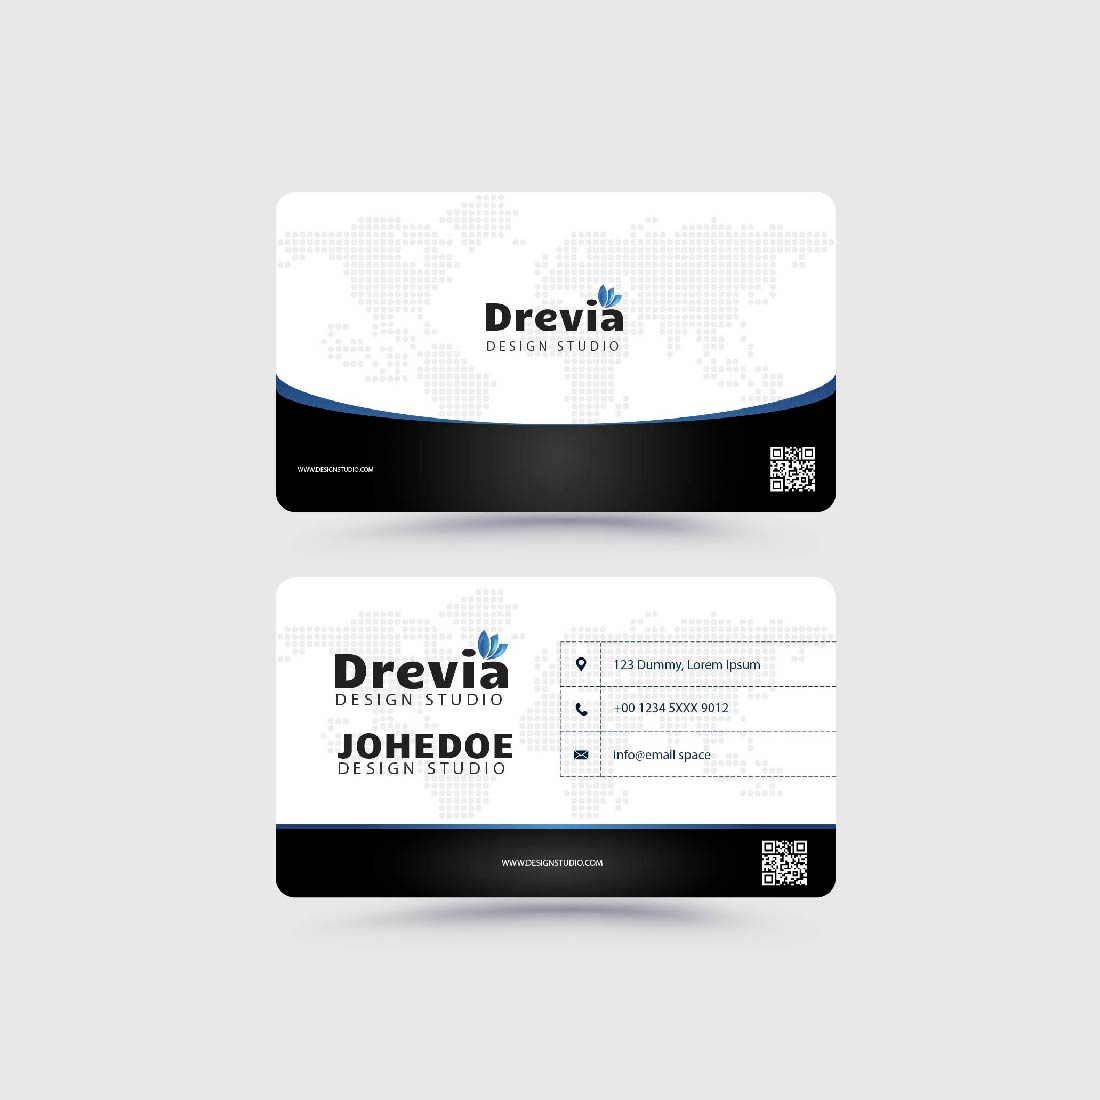 Professional Business Card Design cover image.